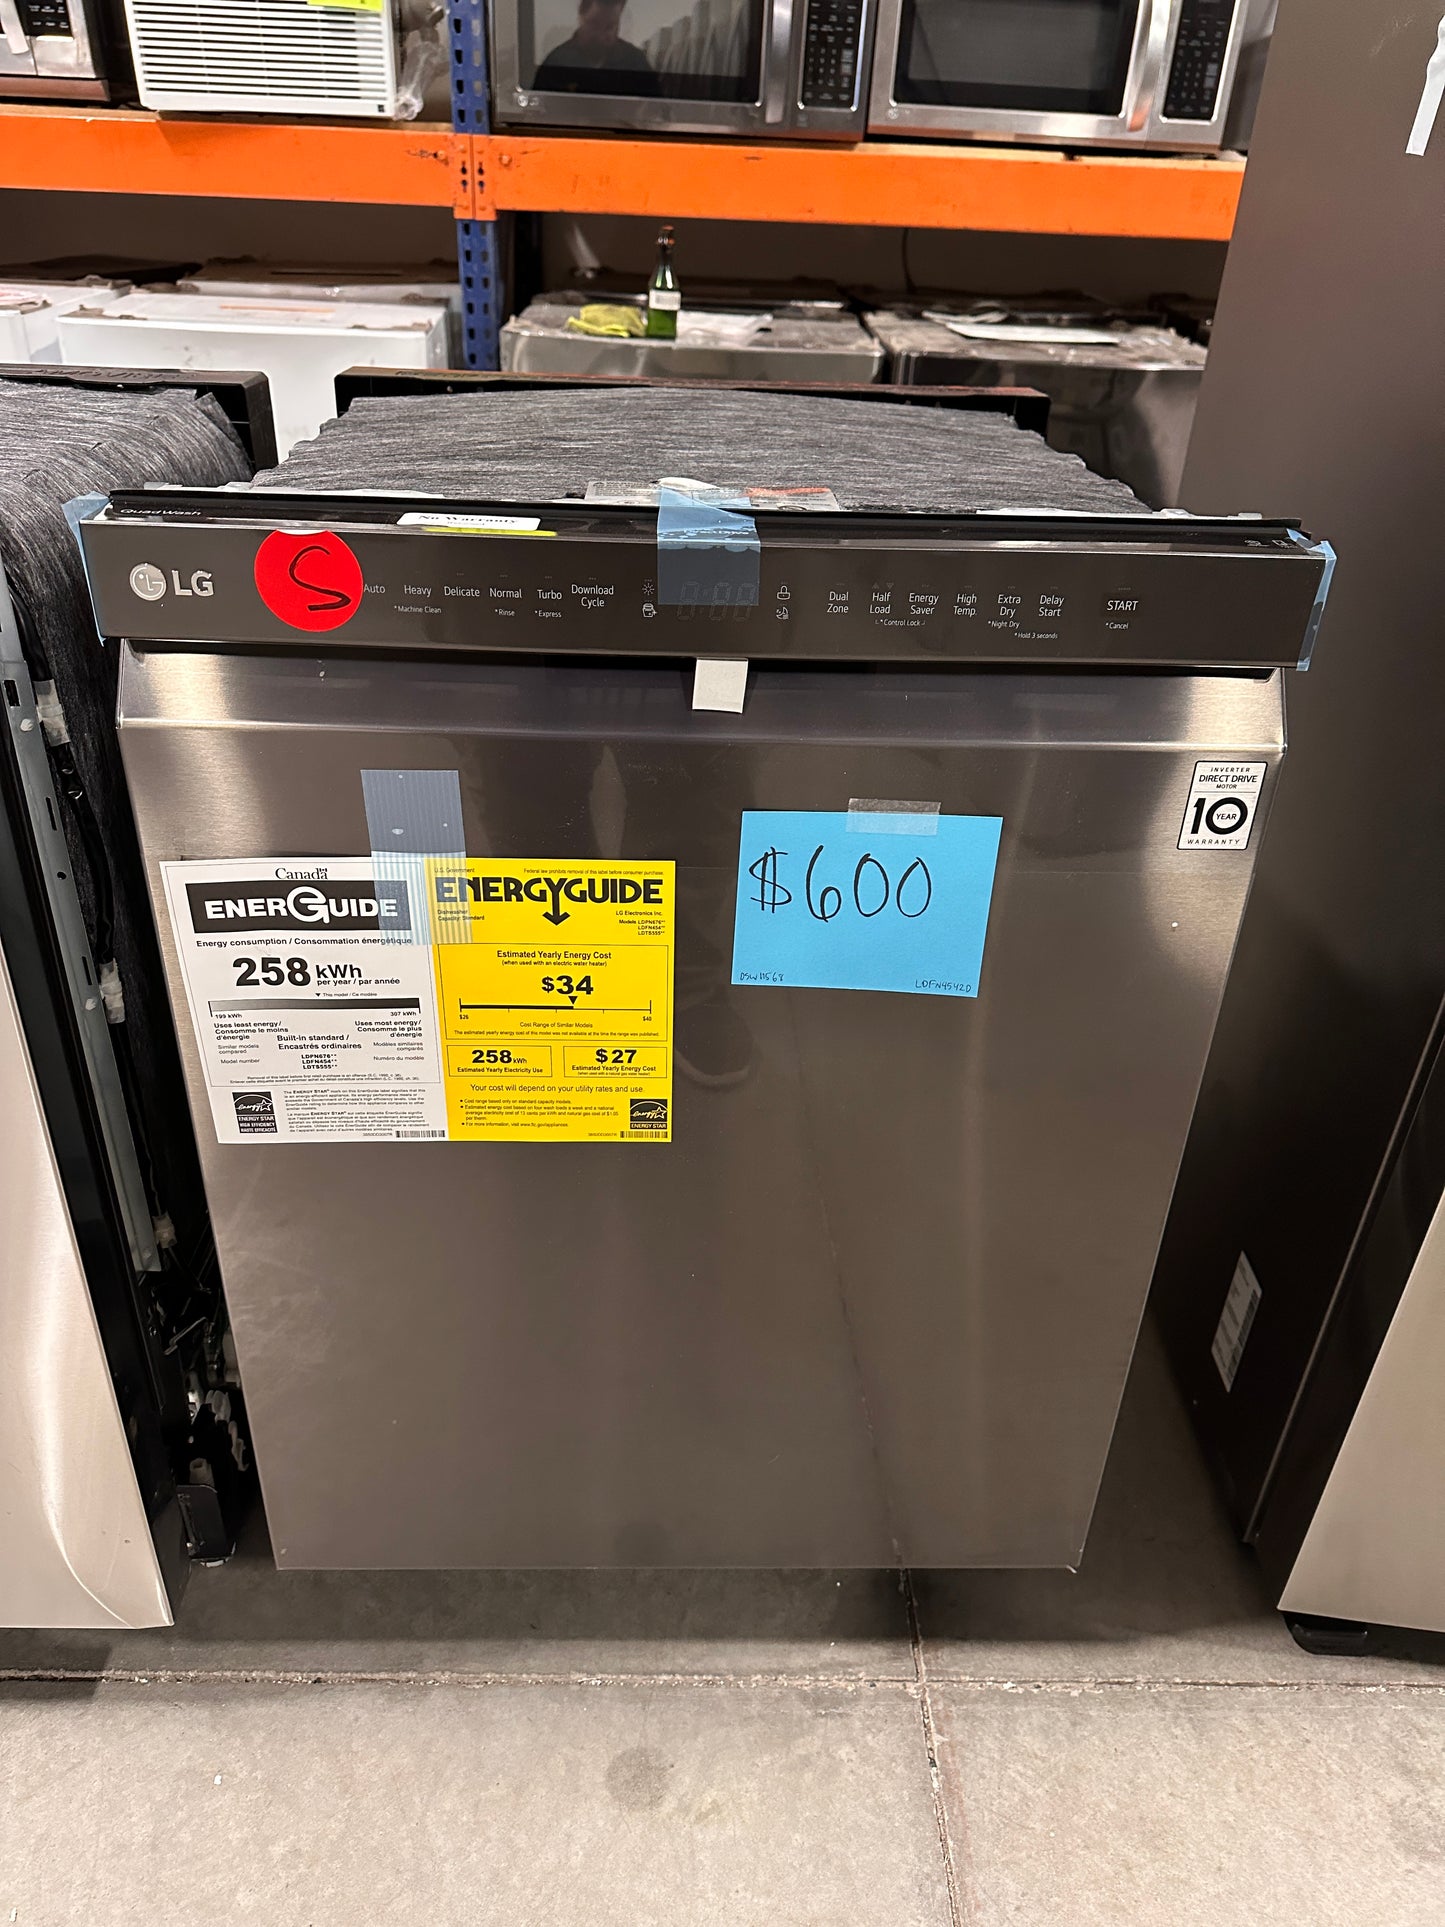 NEW SMART LG DISHWASHER with 3RD RACK - DSW11568